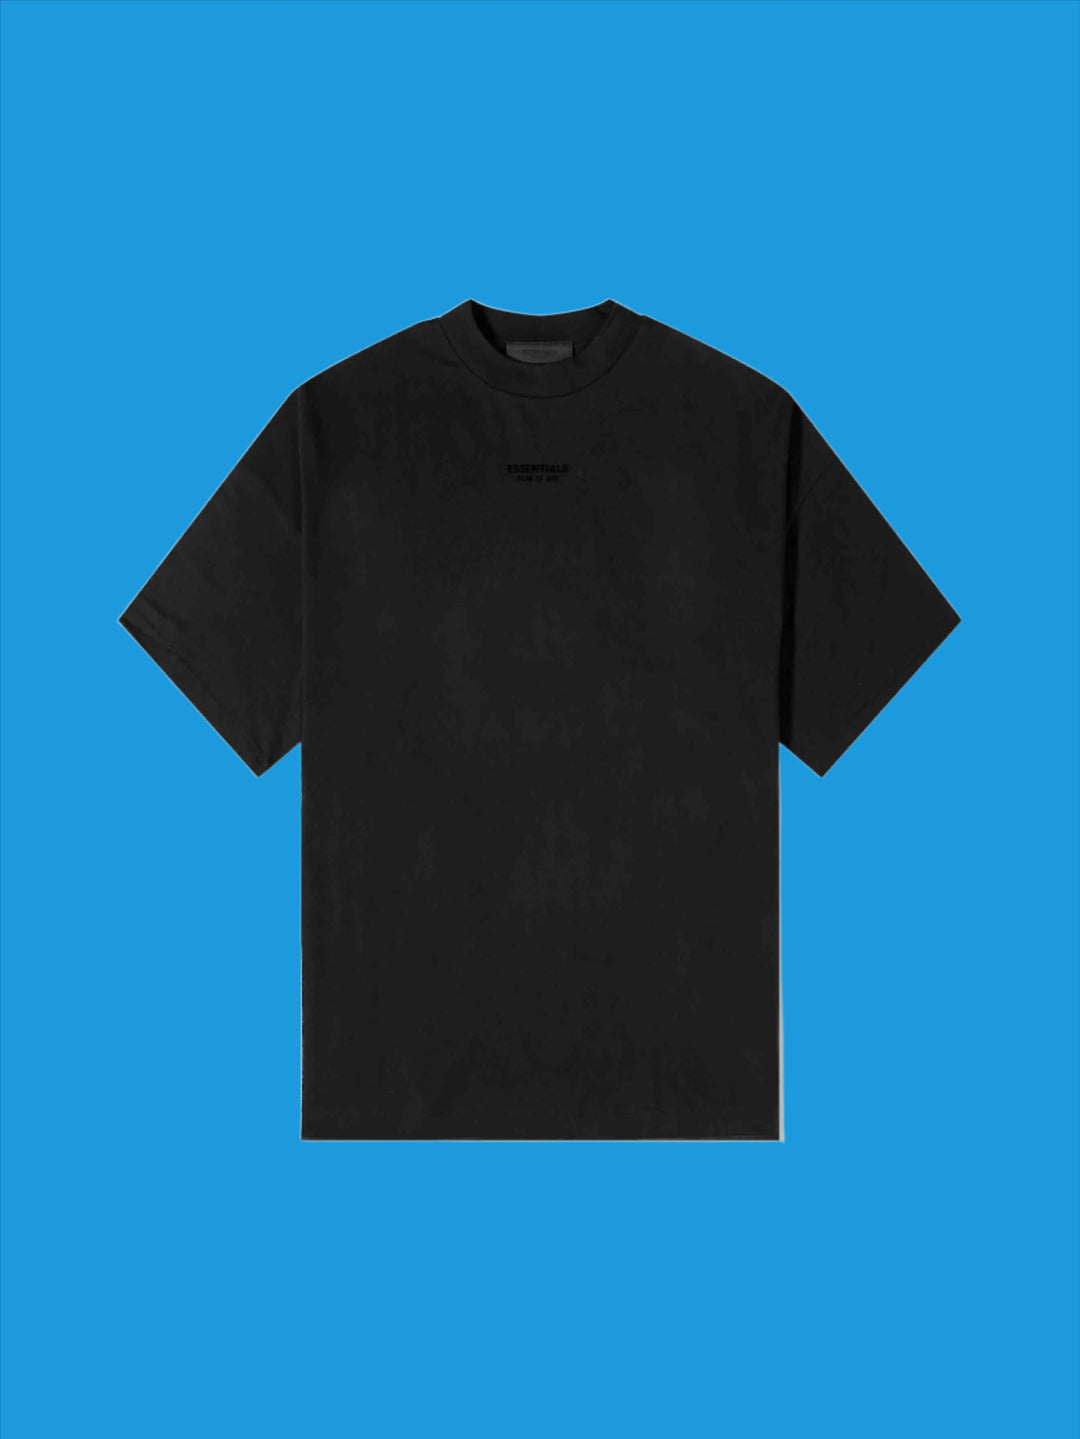 Fear of God Essentials Tee Jet Black in Auckland, New Zealand - Shop name